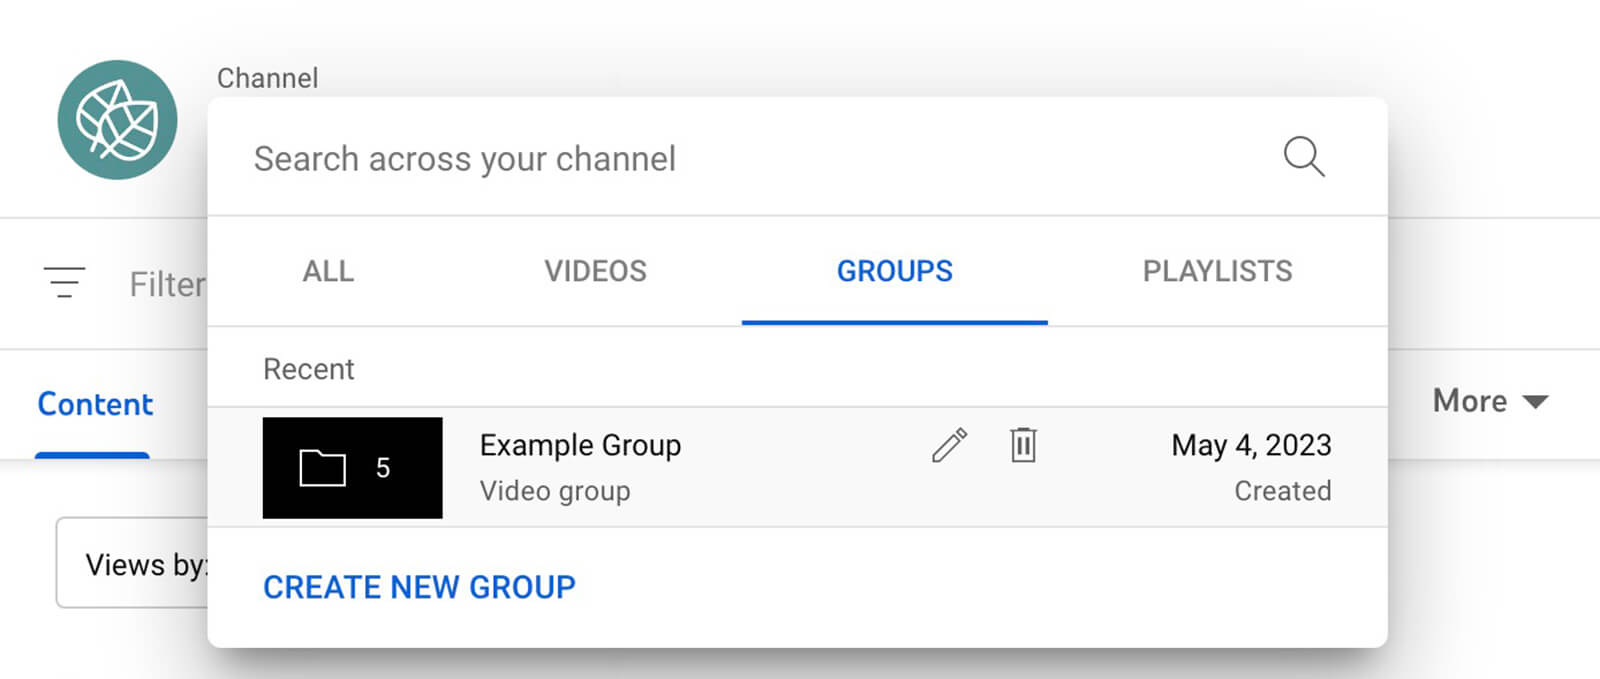 youtube-analytics-groups-creating-new-group-collections-4